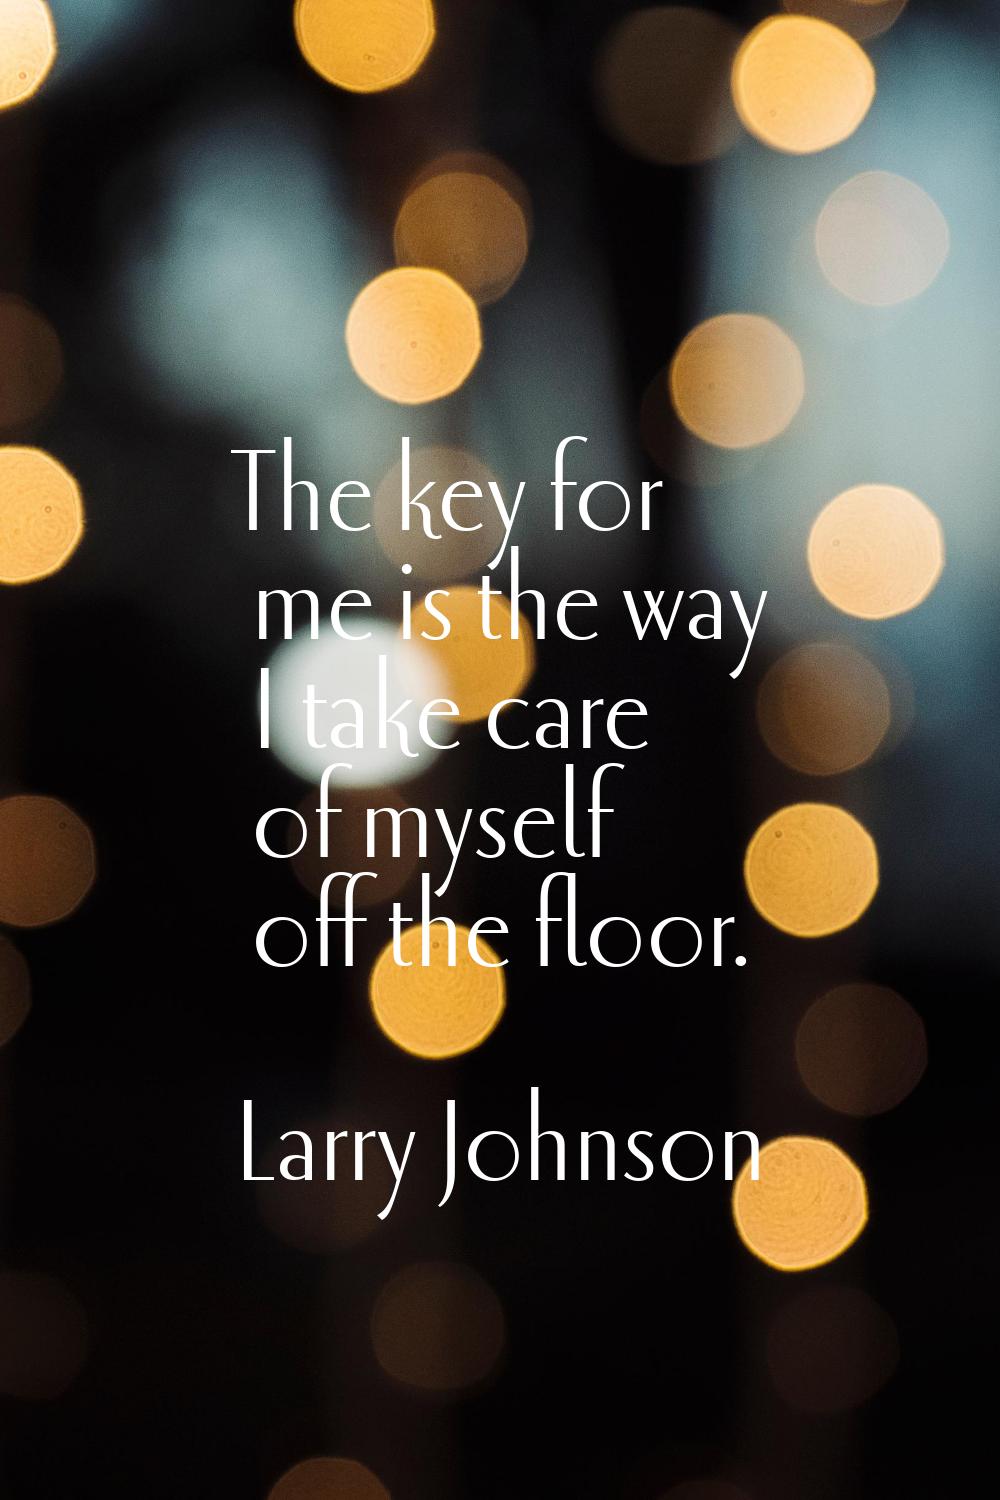 The key for me is the way I take care of myself off the floor.